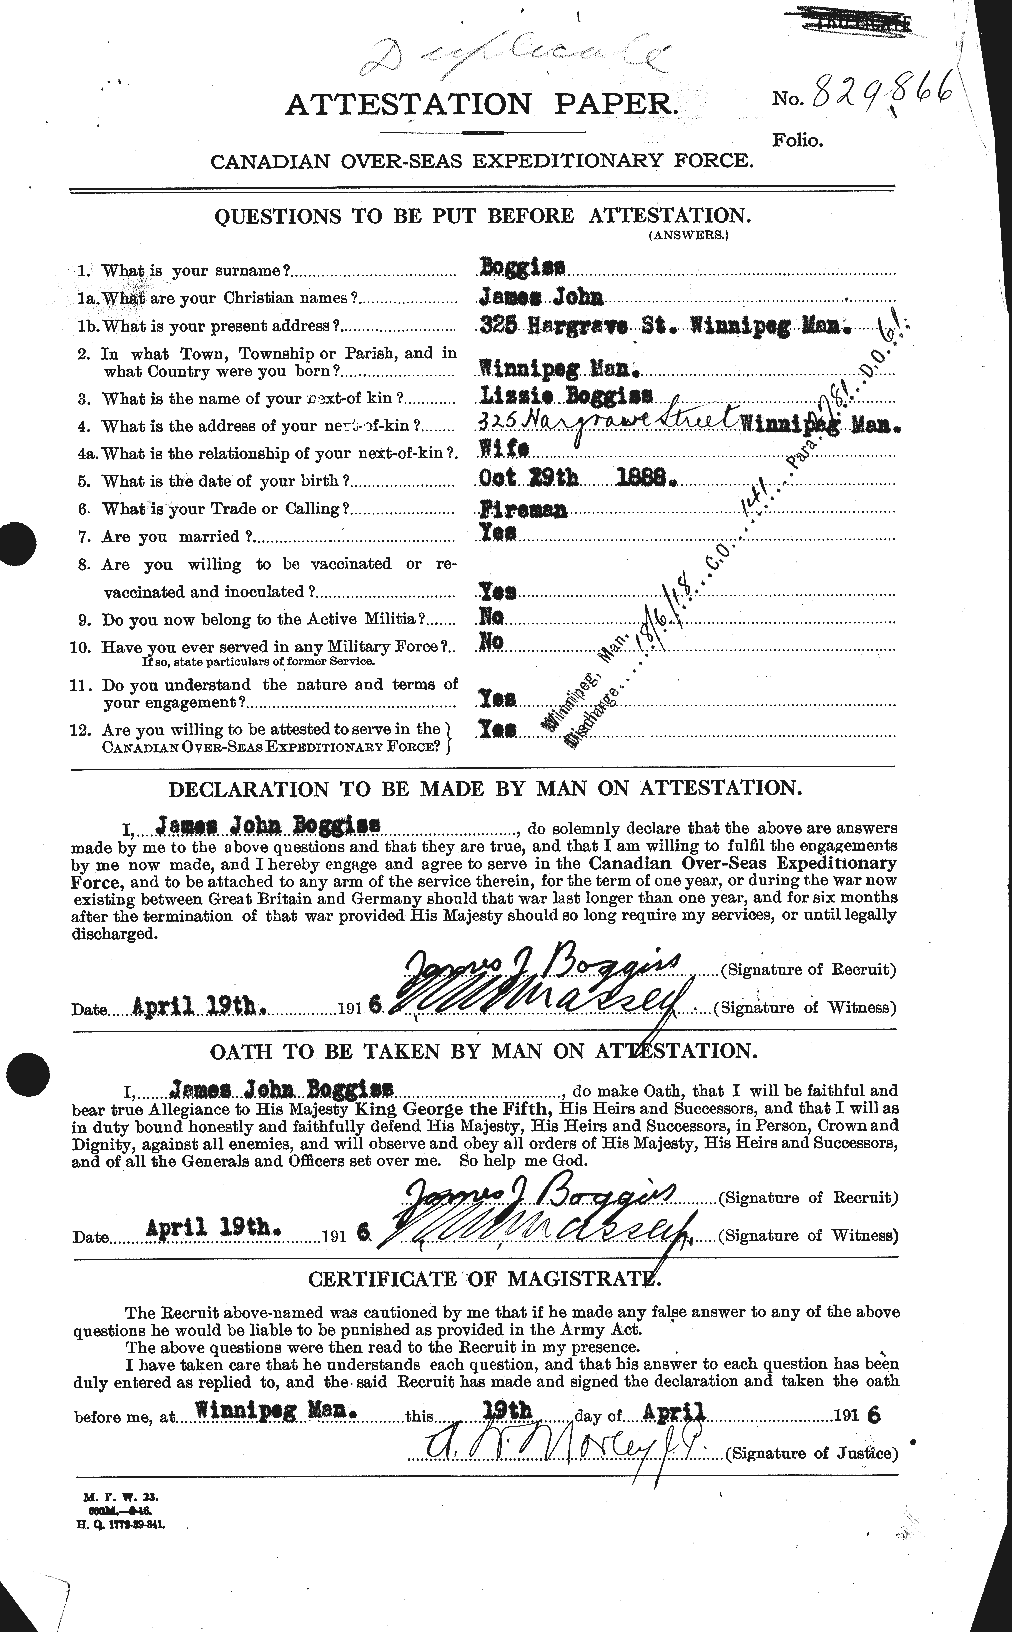 Personnel Records of the First World War - CEF 249244a